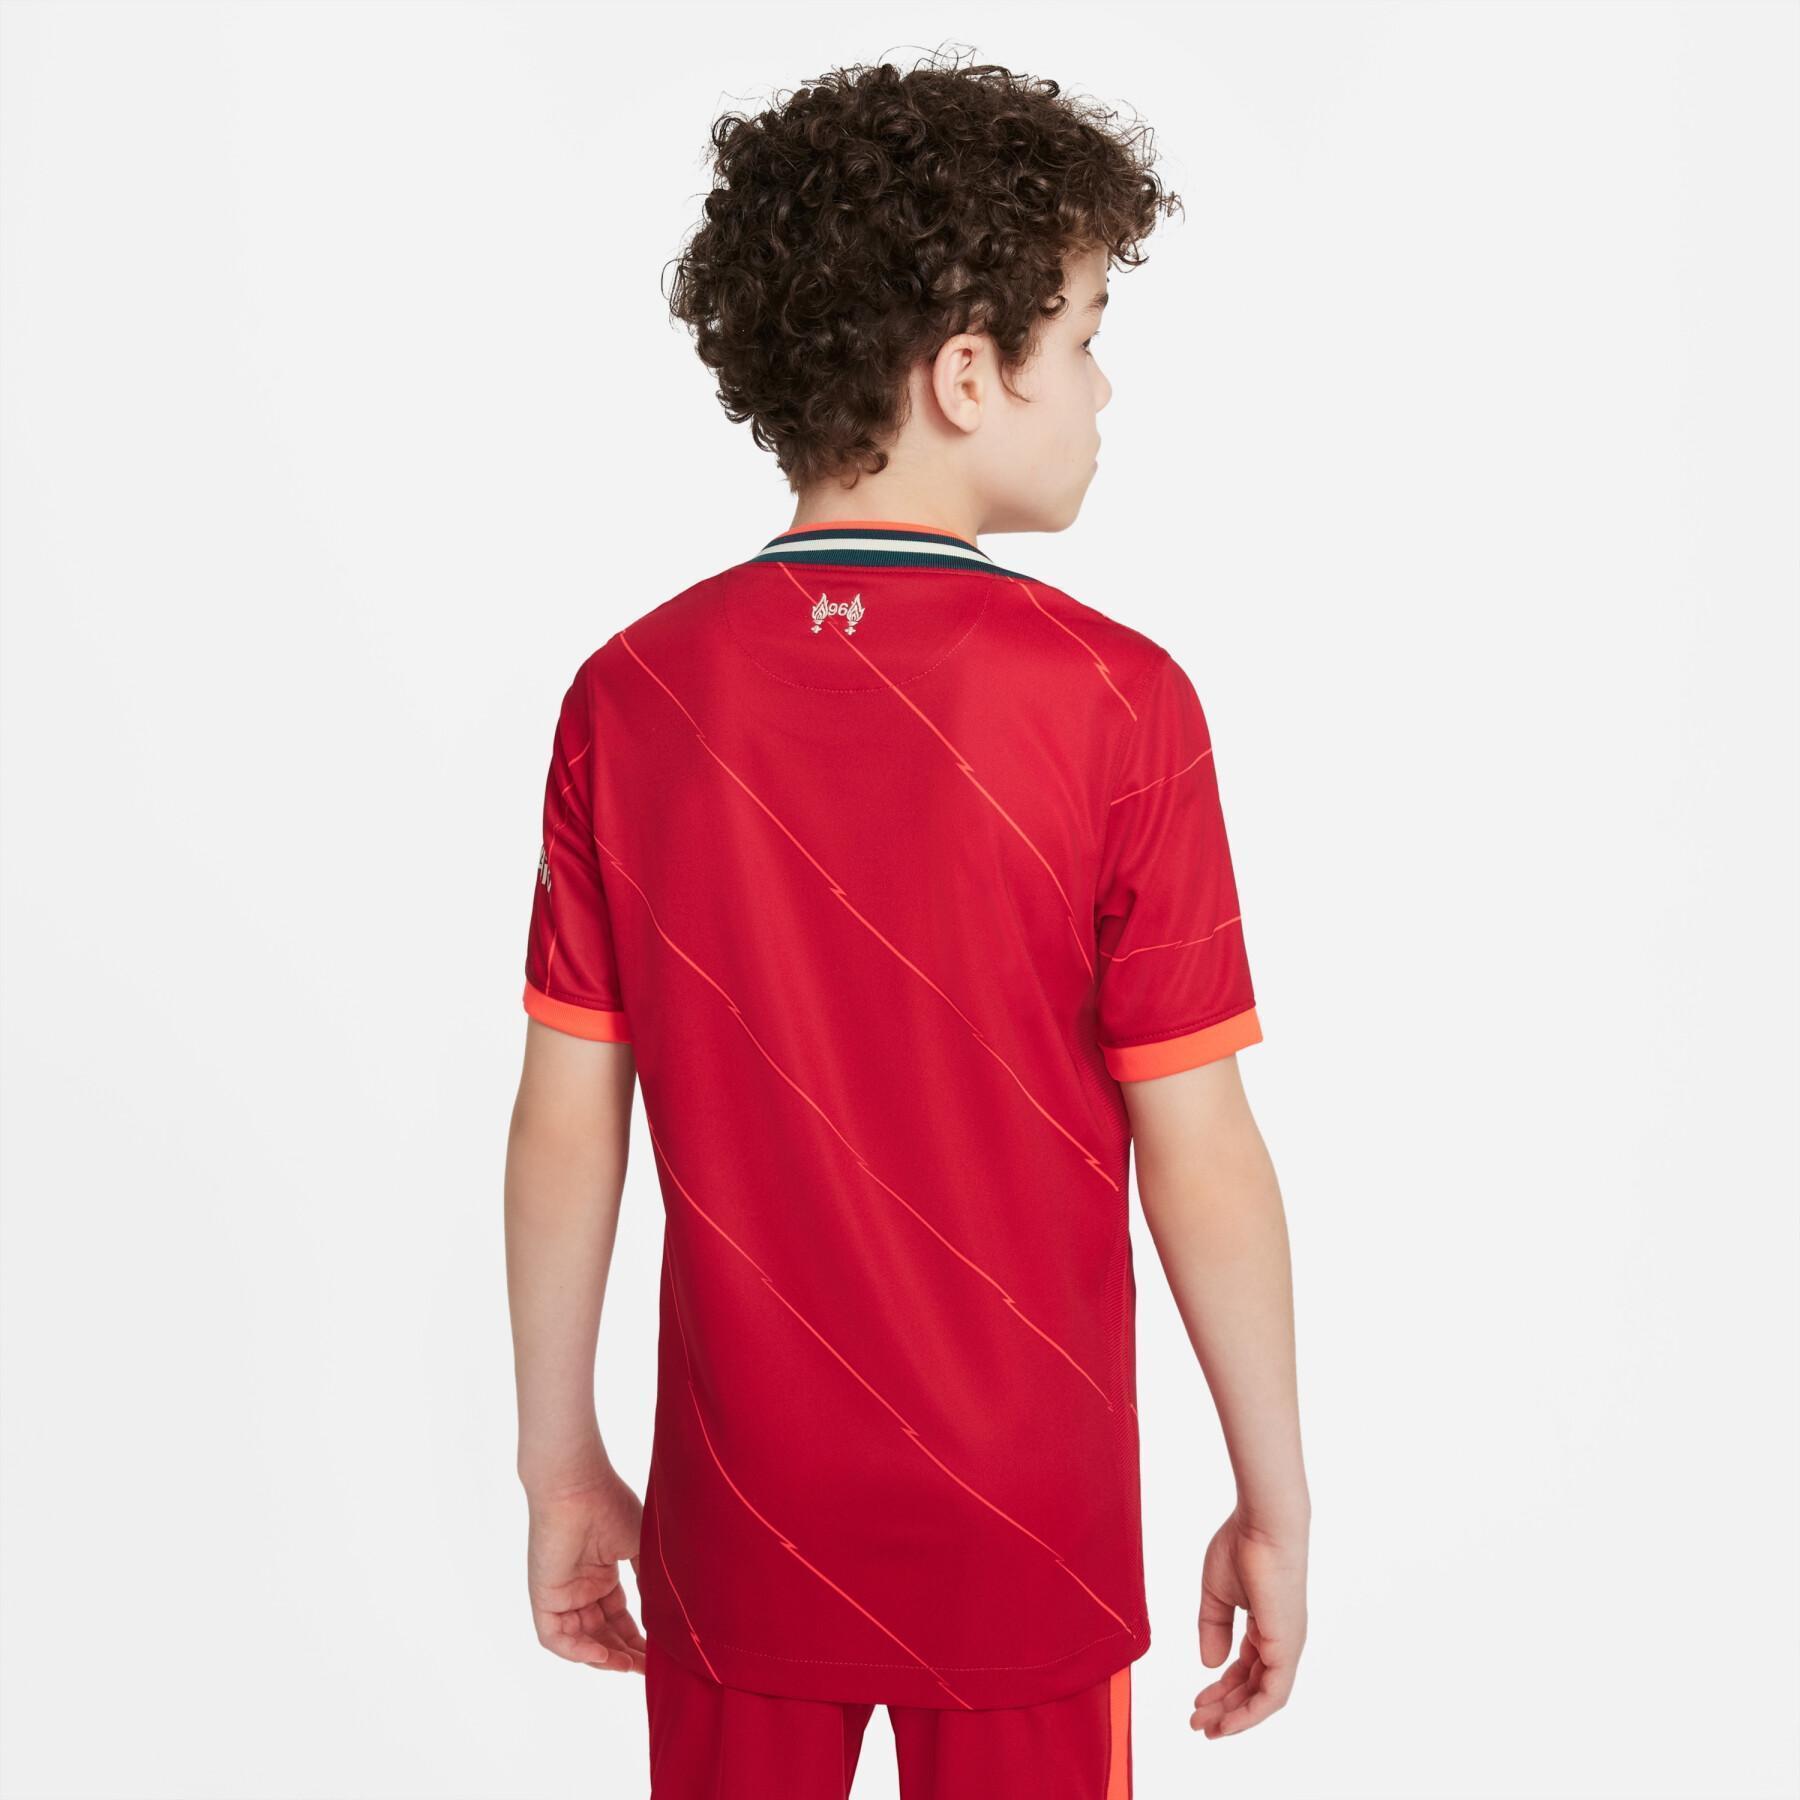 Home jersey child Liverpool FC 2021/22